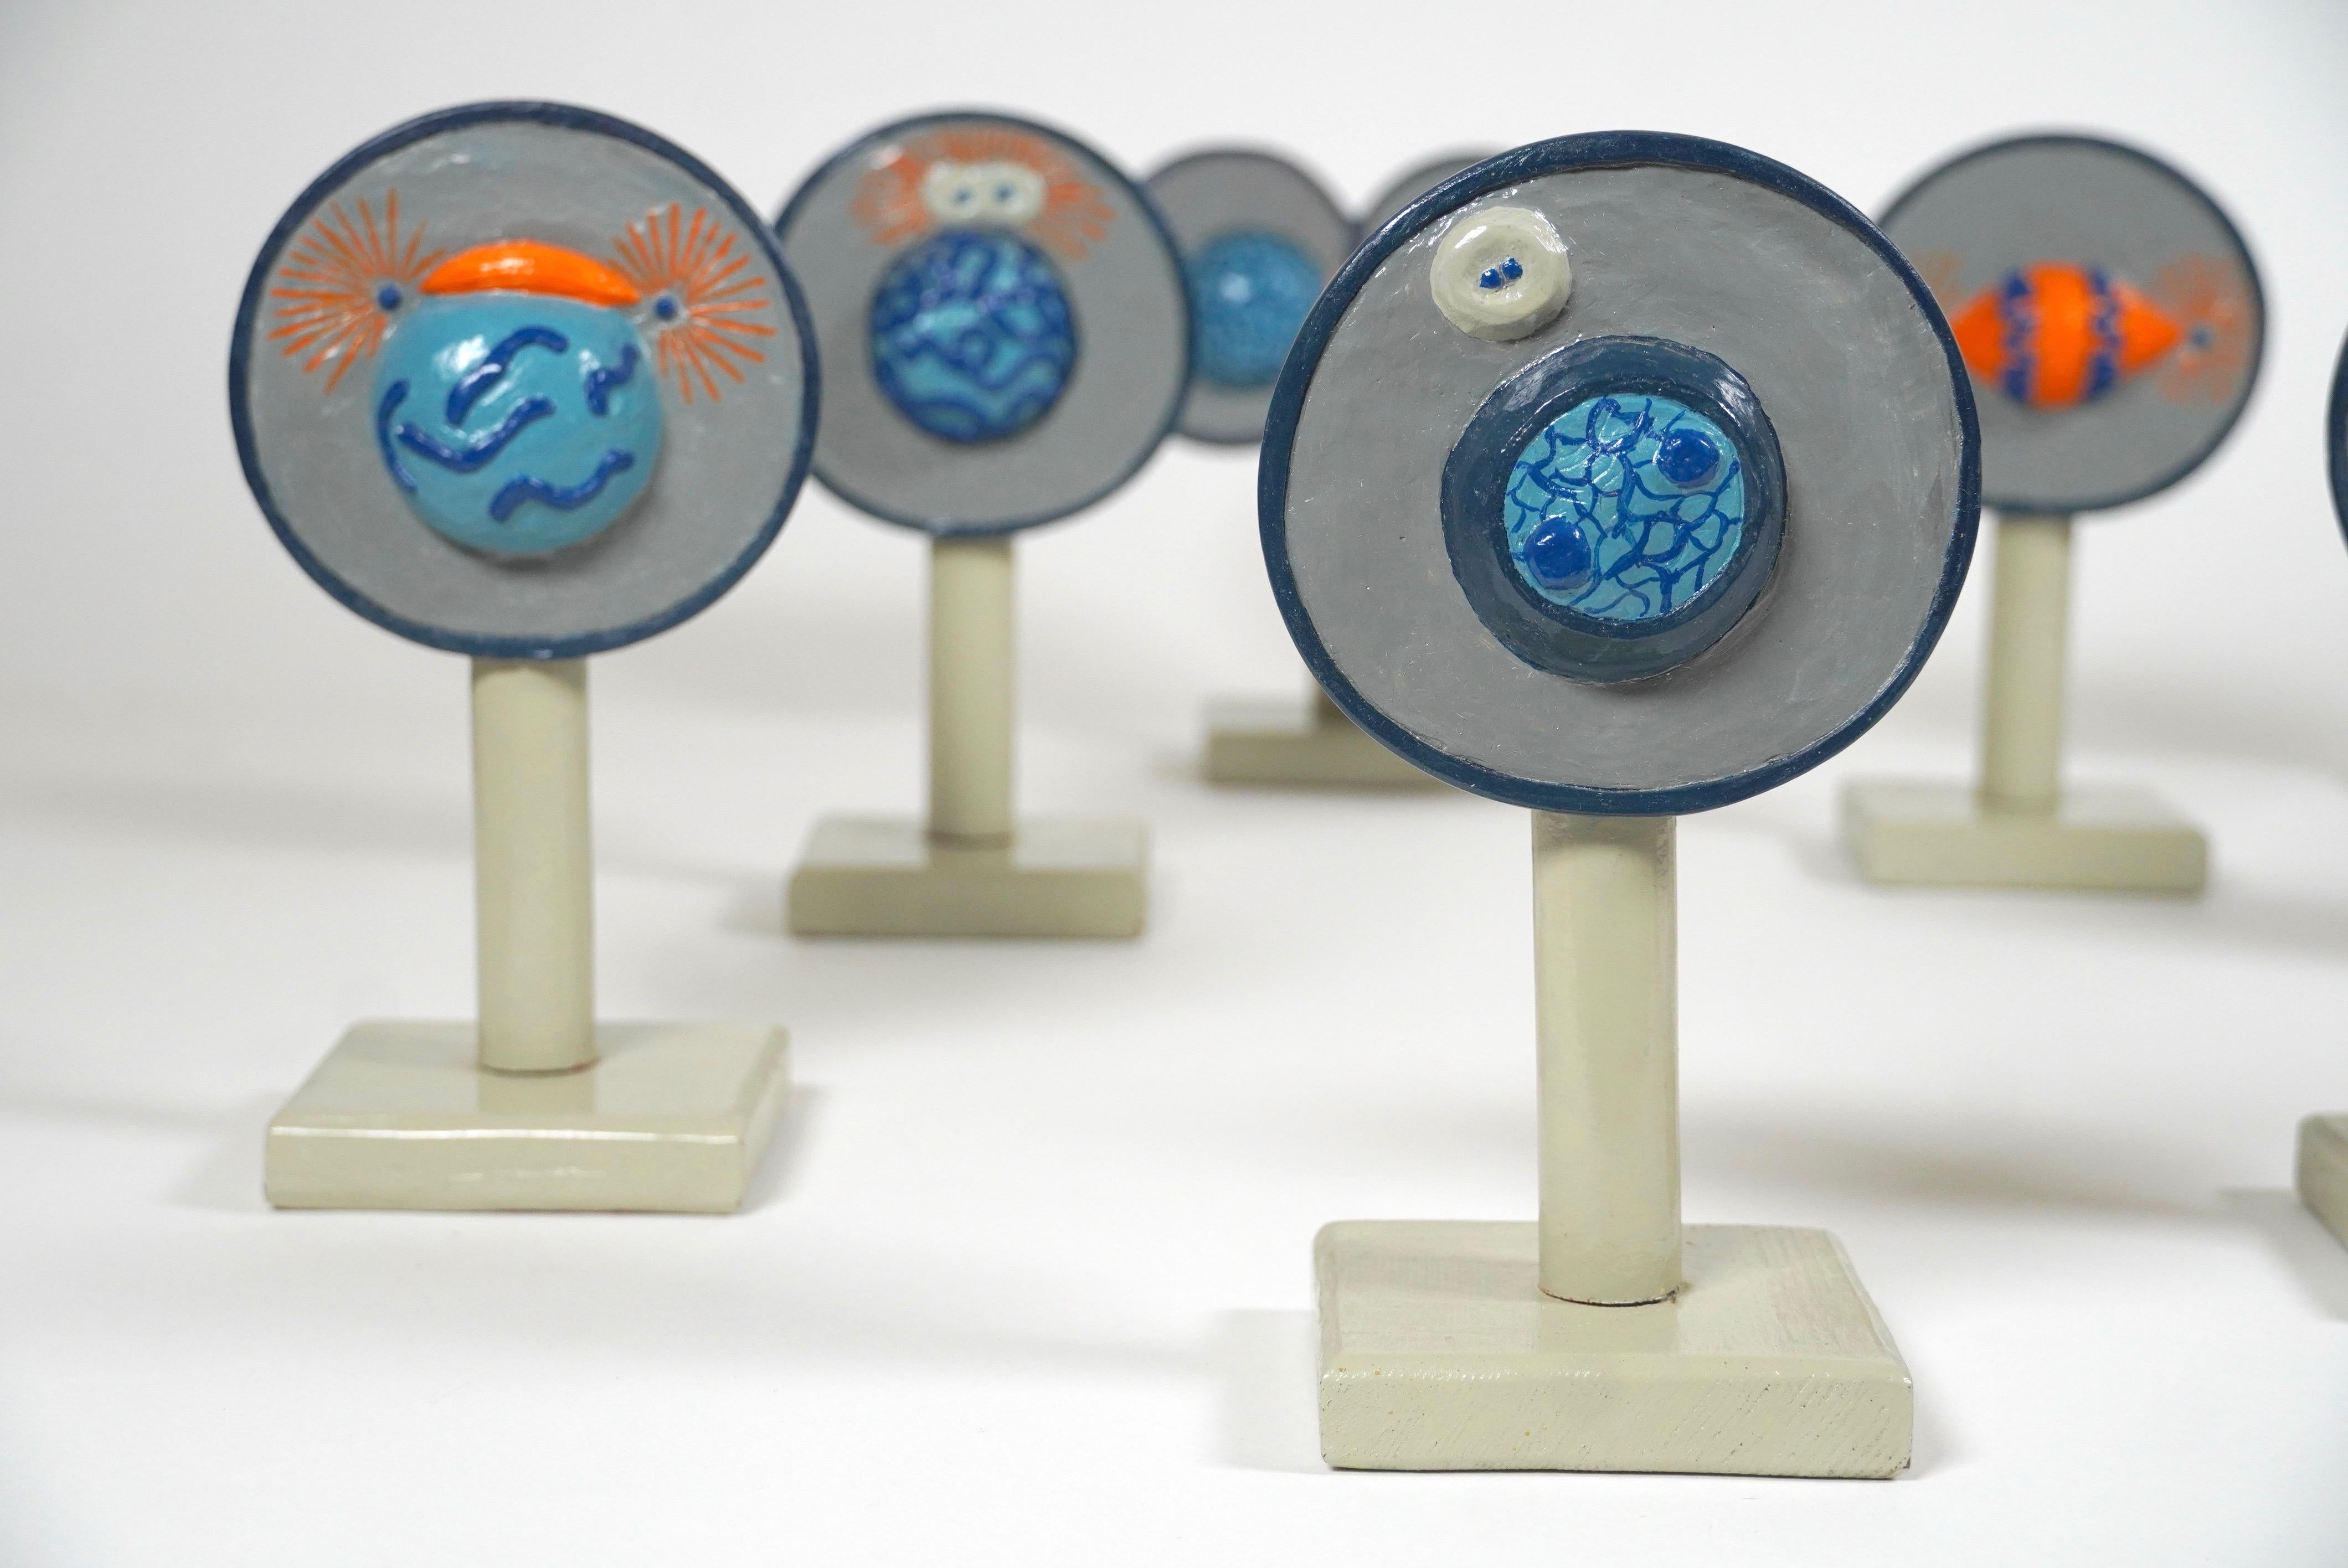 Vintage handmade 1960s scientific plaster and wood models showing the different stages of mitosis (cell division), this set shows the 5 phases, prophase, prometaphase, metaphase, anaphase, telophase and cytokinesis. The plaster forms are painted in